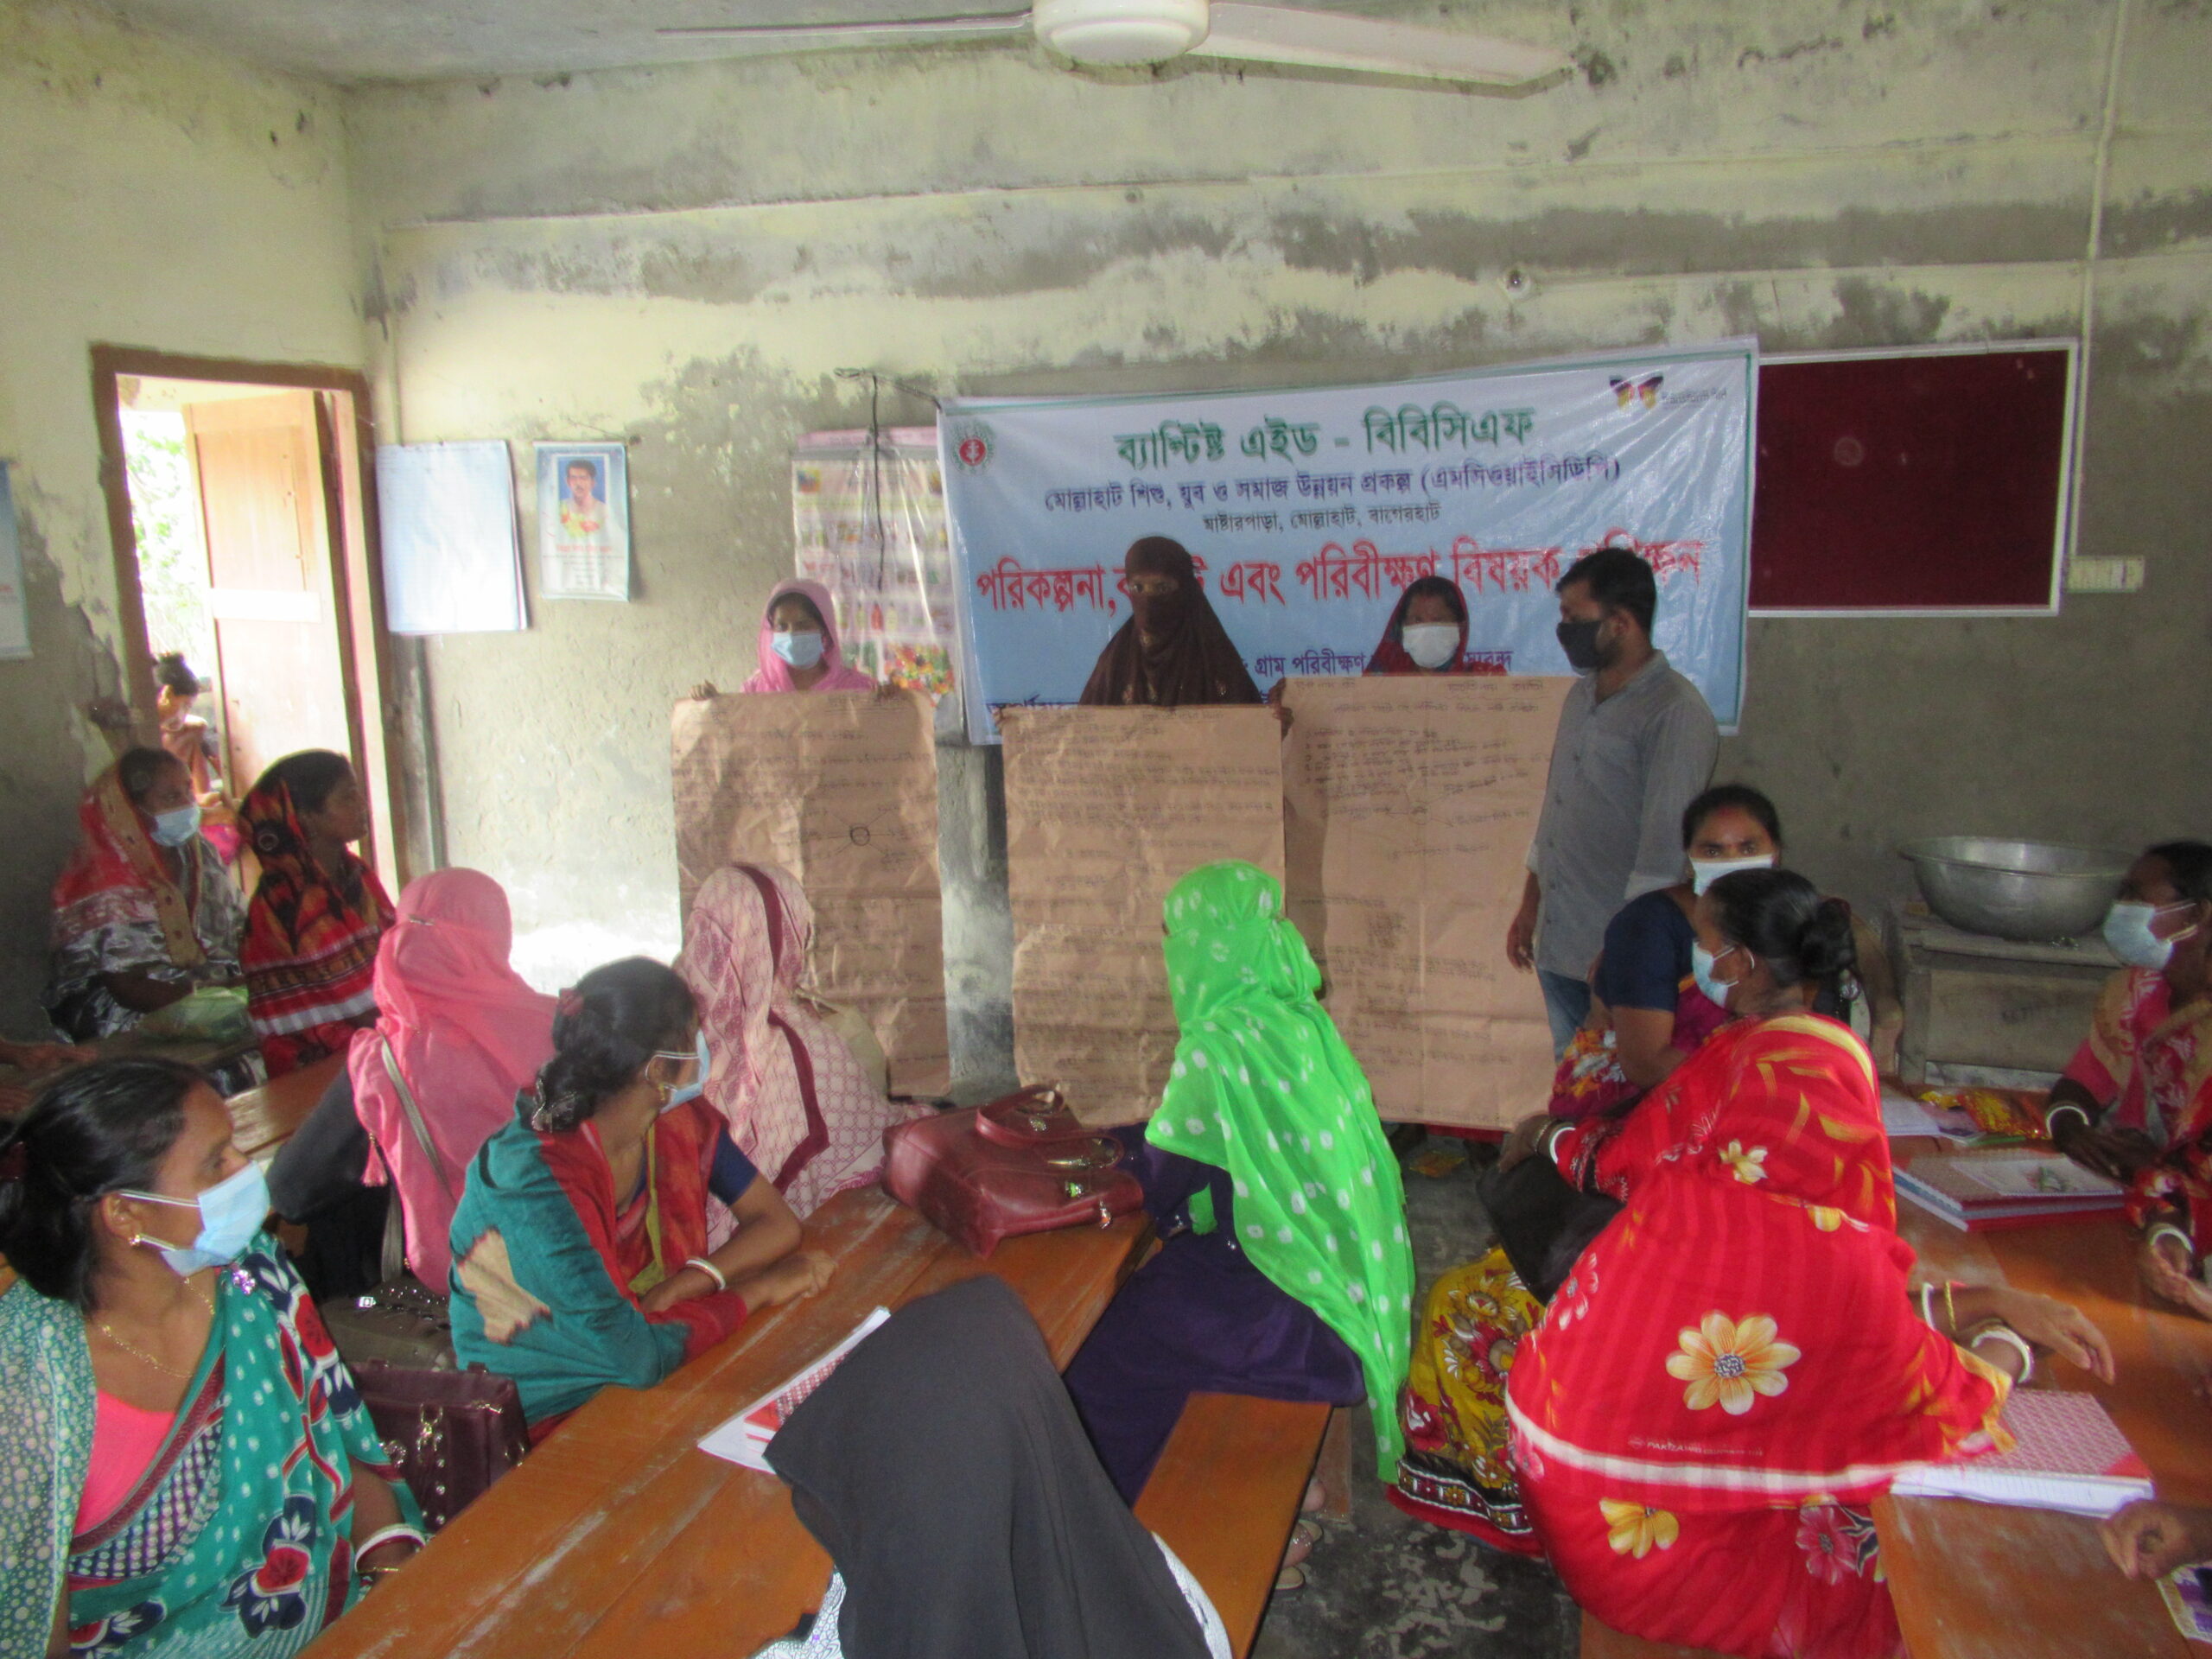 Training on Planning, Budgeting and Monitoring with SHG